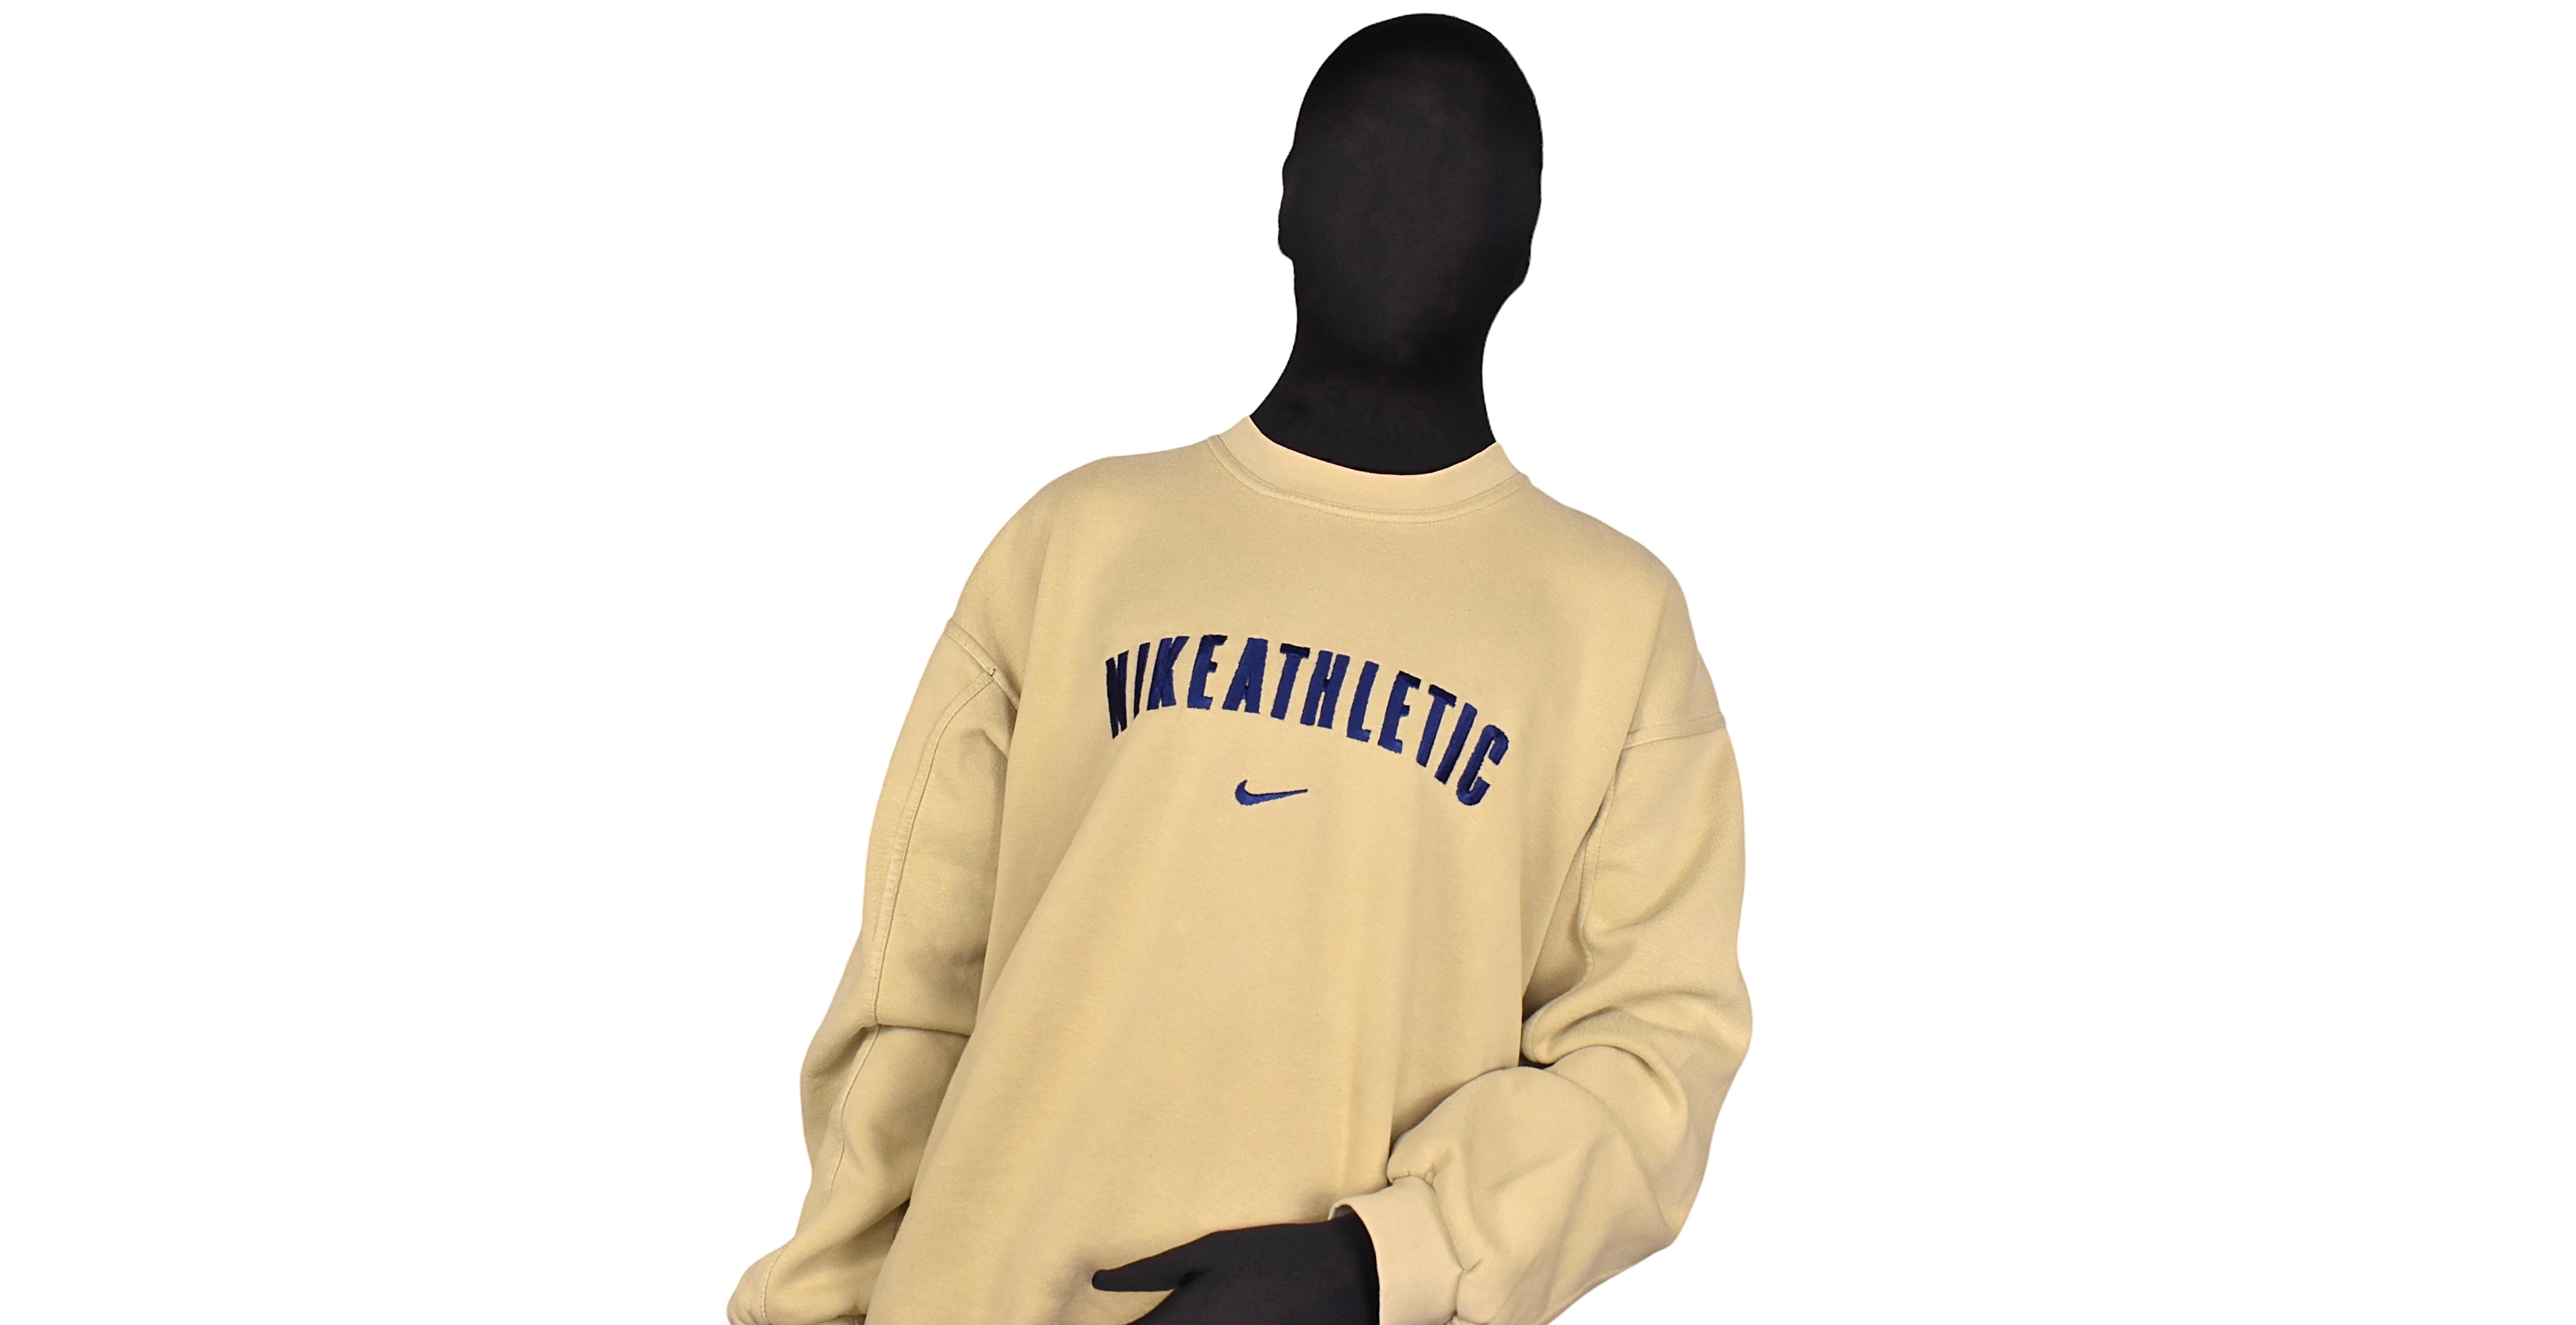 Beige vintage Nike sweatshirt modeled against a clean white background. Elevate your vintage clothing game with this timeless piece from Recovered Vintage online